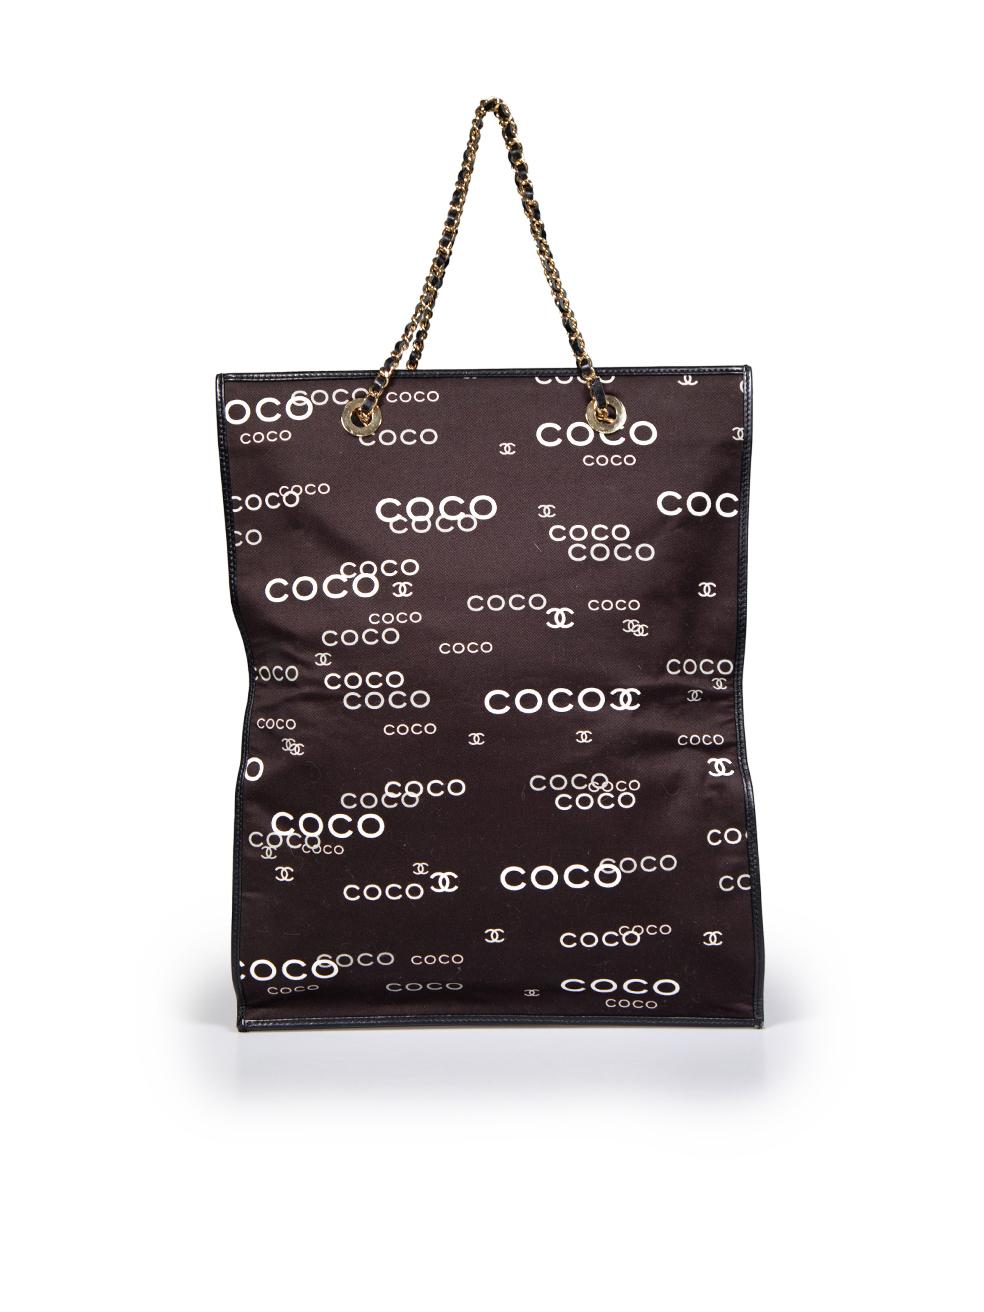 Chanel 2002-2003 Black Coco Print Chain Tote Bag In Excellent Condition For Sale In London, GB